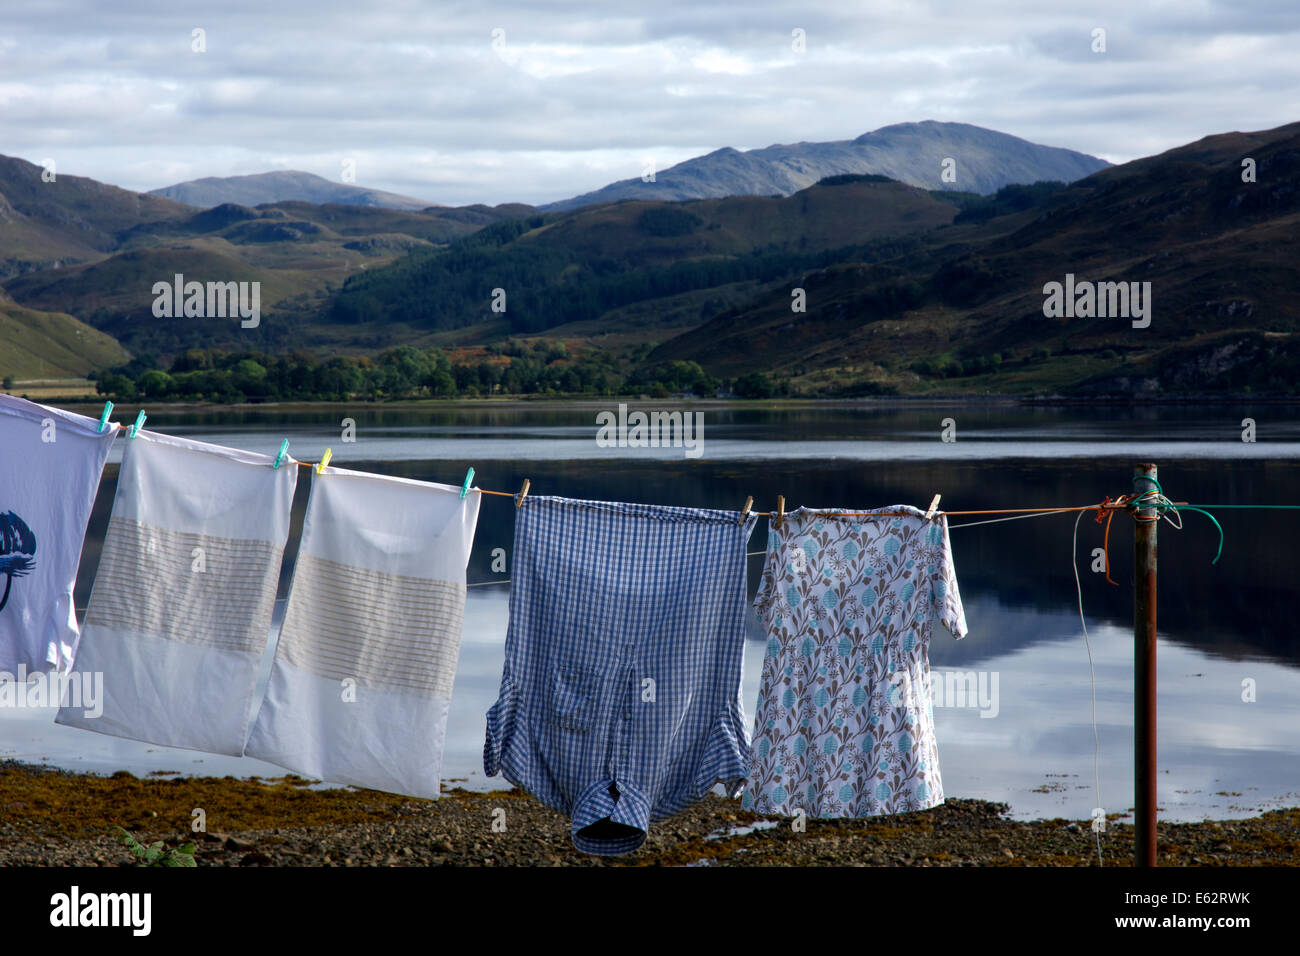 Fresh Clean Clothes Are Drying Outside. Clothes Hanging To Dry On